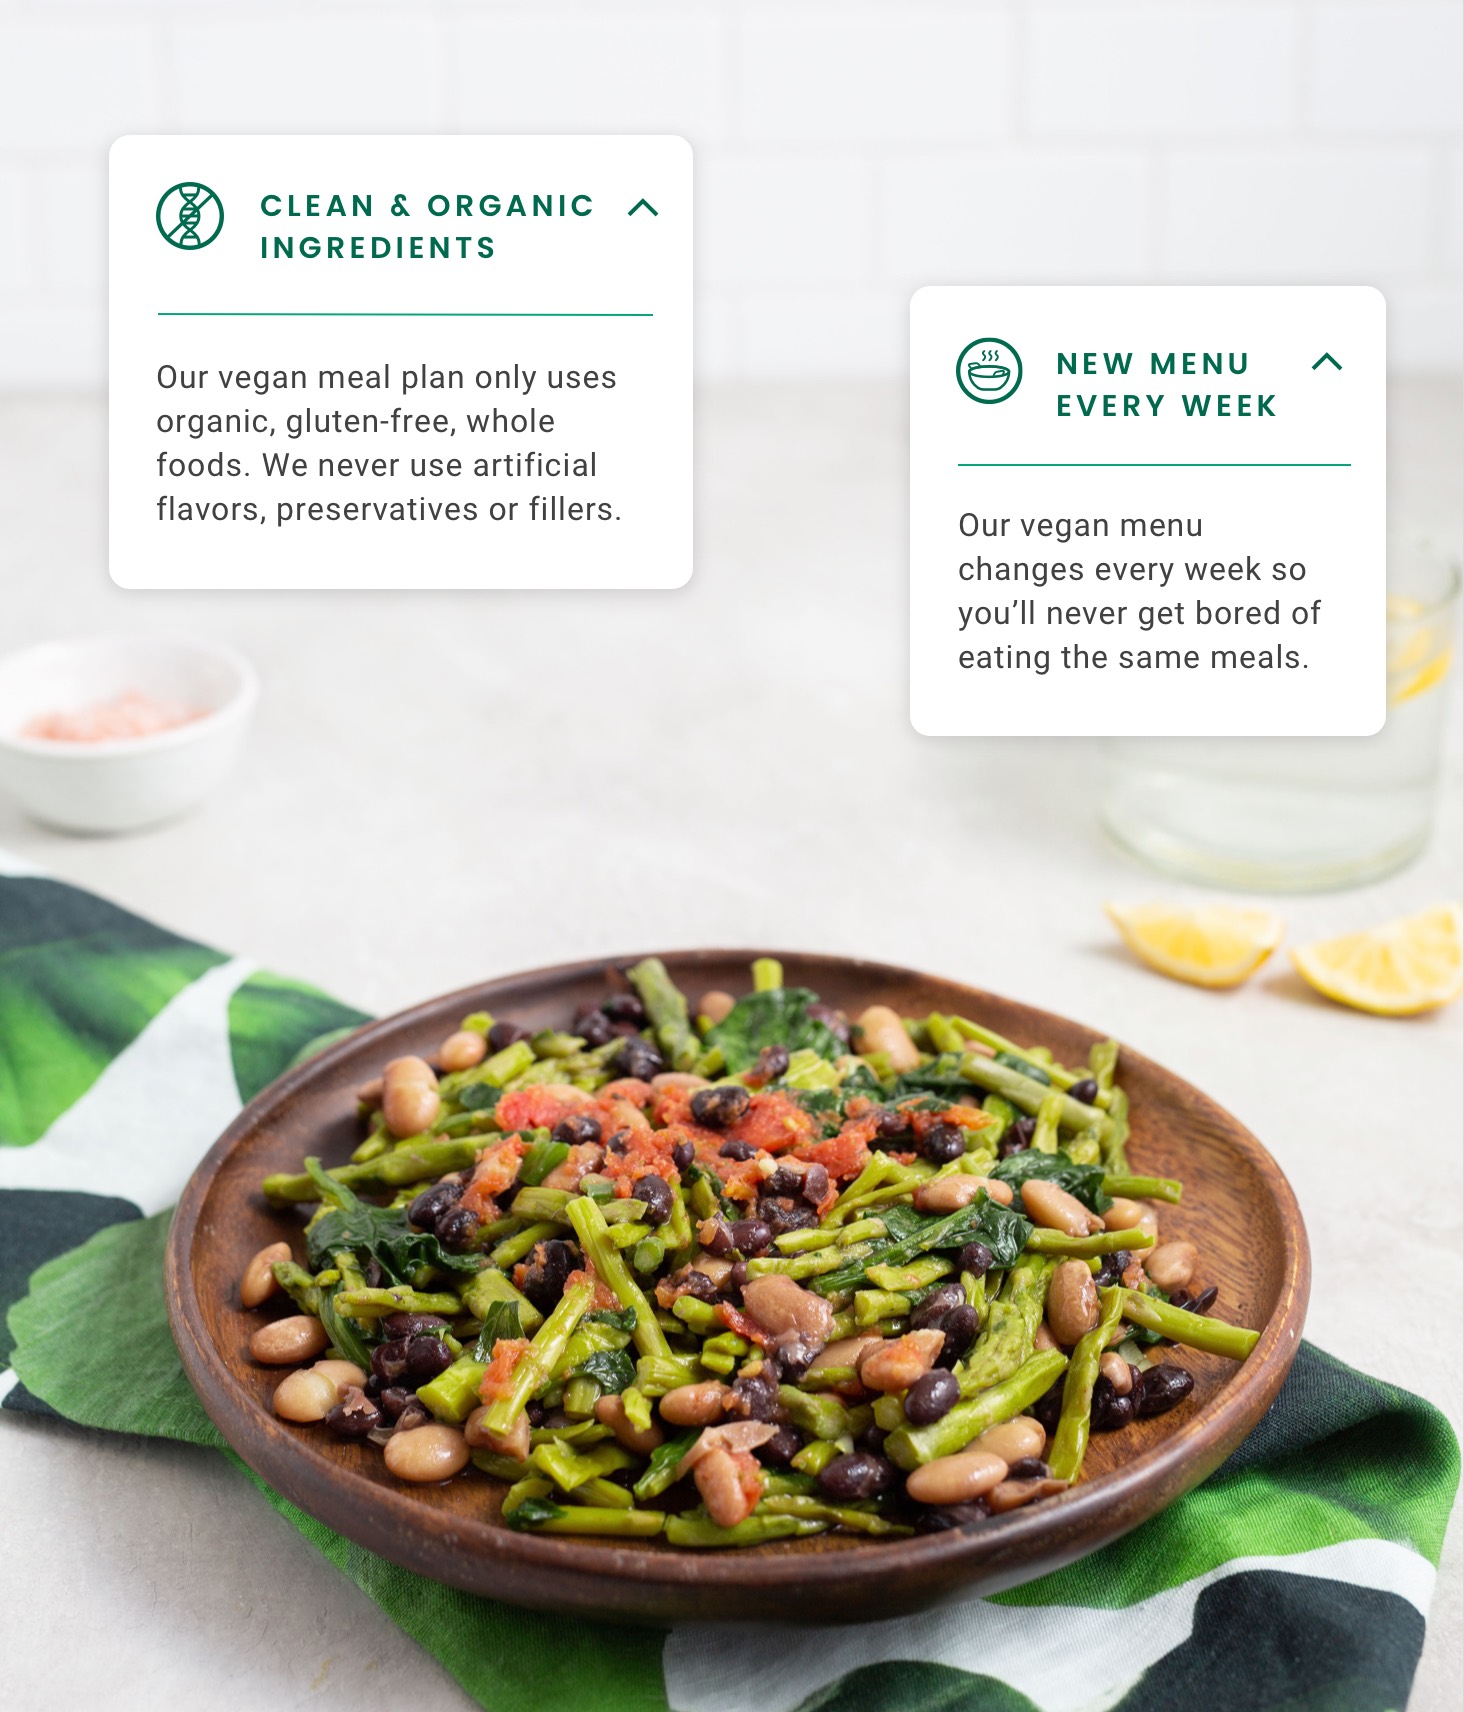 Asparagus meal ingredients highlight